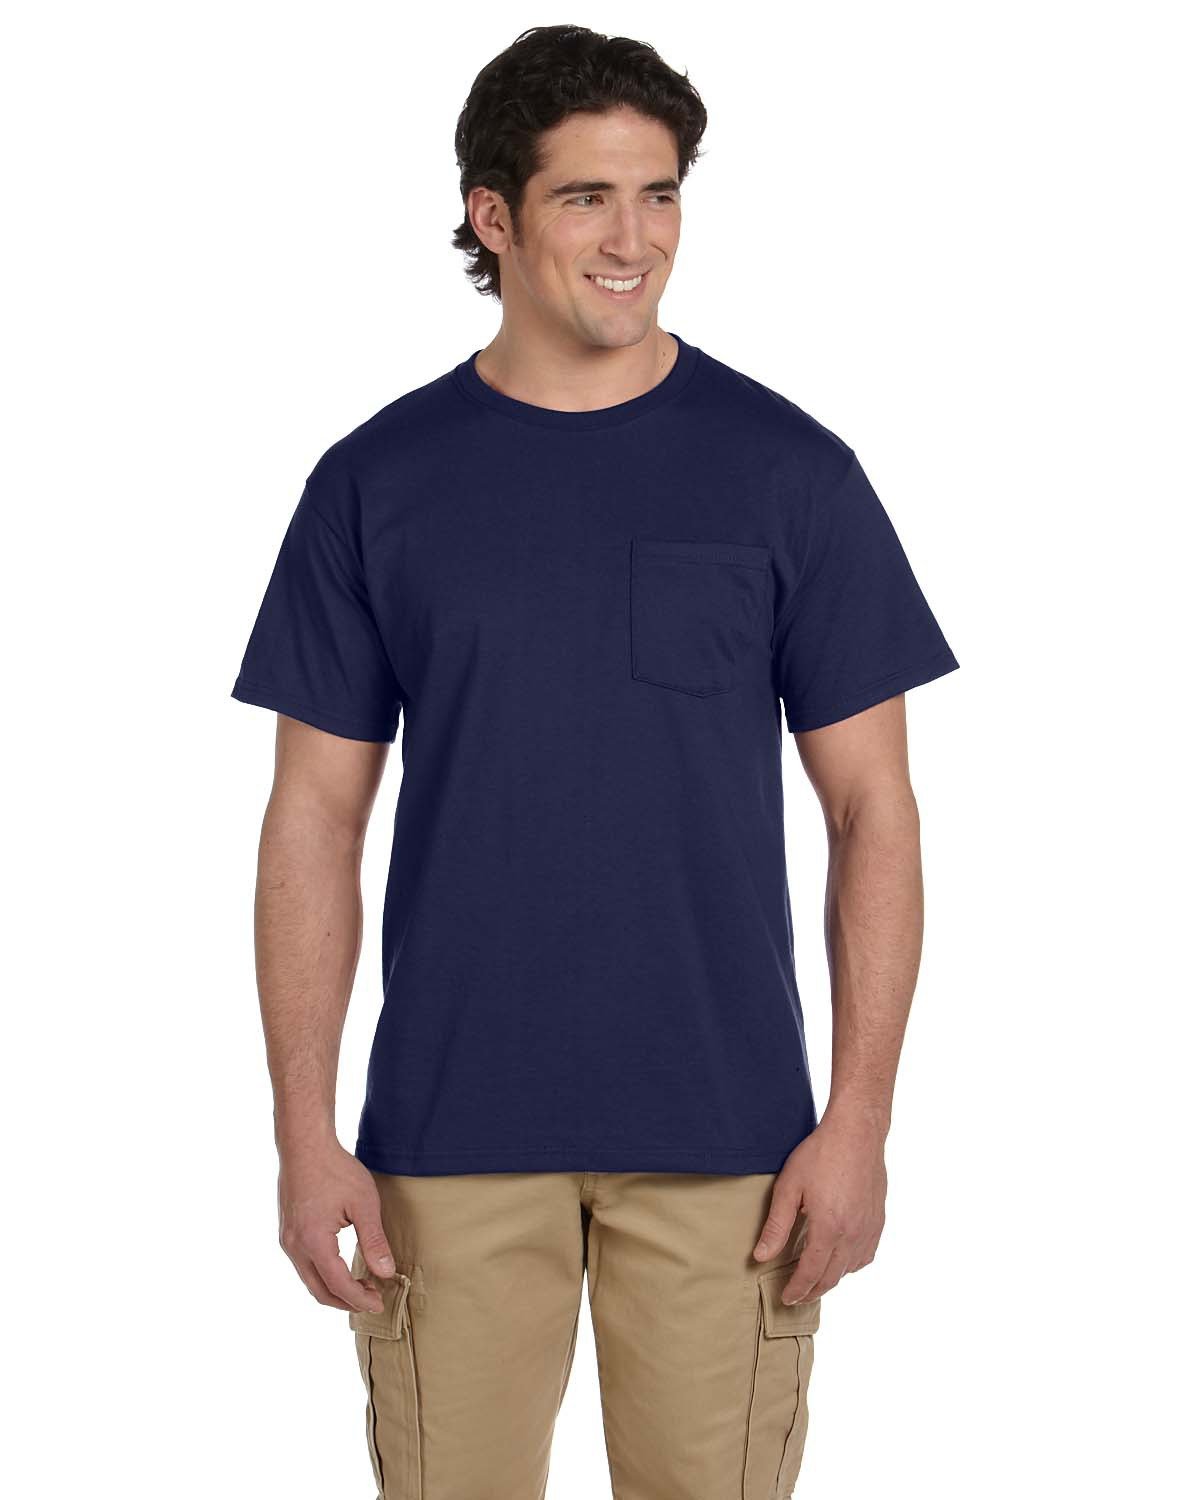 Picture of Jerzees Adult DRI-POWER® ACTIVE Pocket T-Shirt